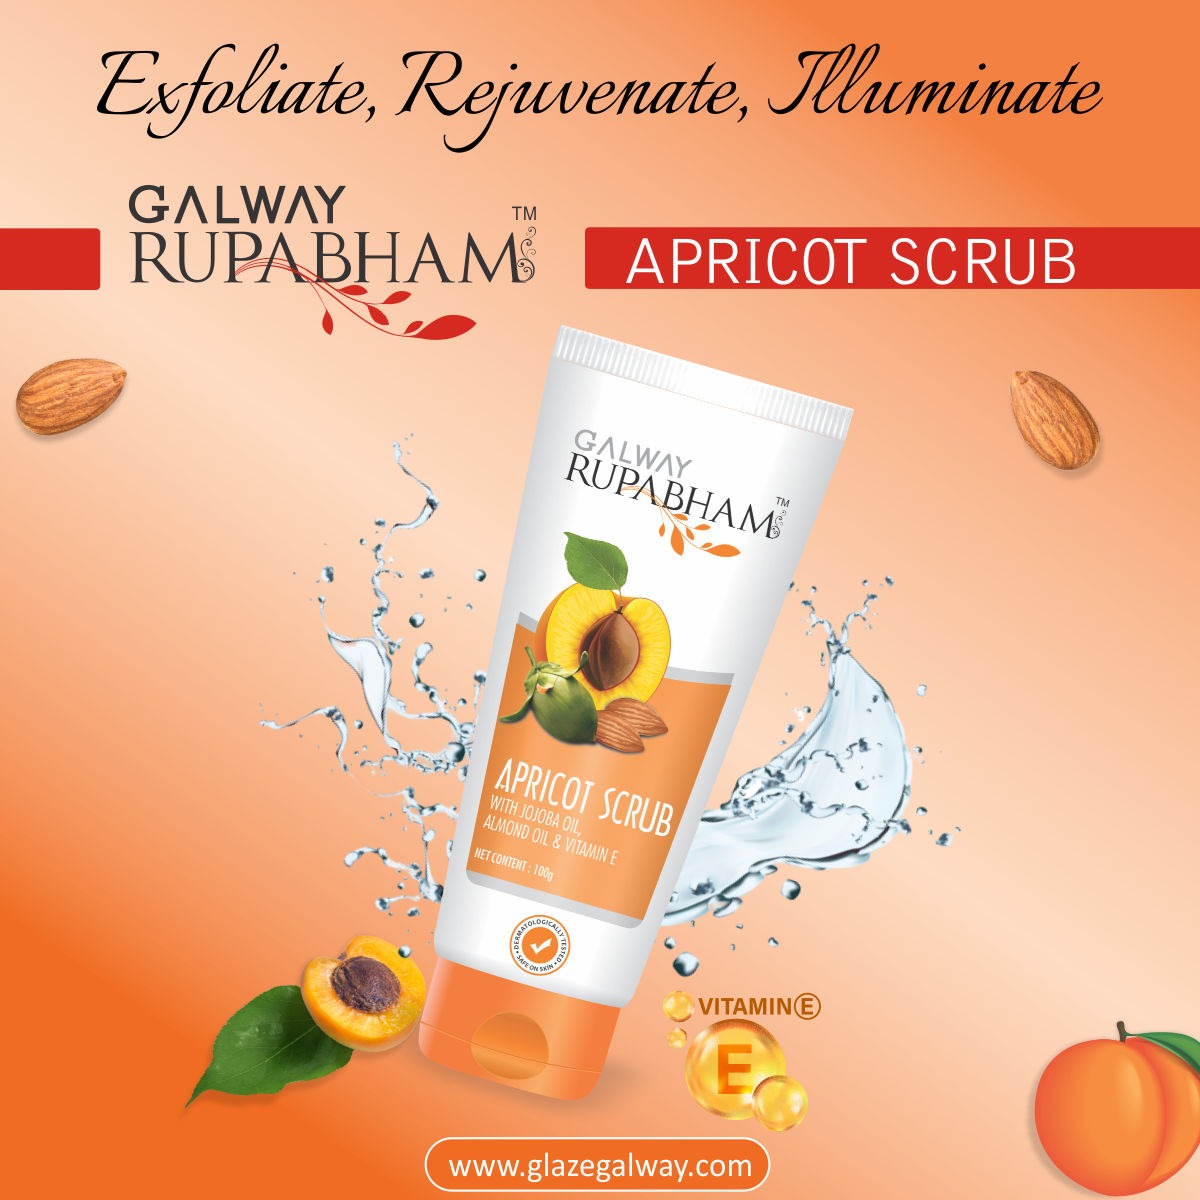 Galway Rupabham Apricot Scrub is now an advanced formulation with herbal infusion of essential oils.
Buy Now...
glazegalway.com/face-care/apri…
#Apricot #facecare #rupabham #apricotscrub #exfoliate #rejwenate #scrubs #faceskin